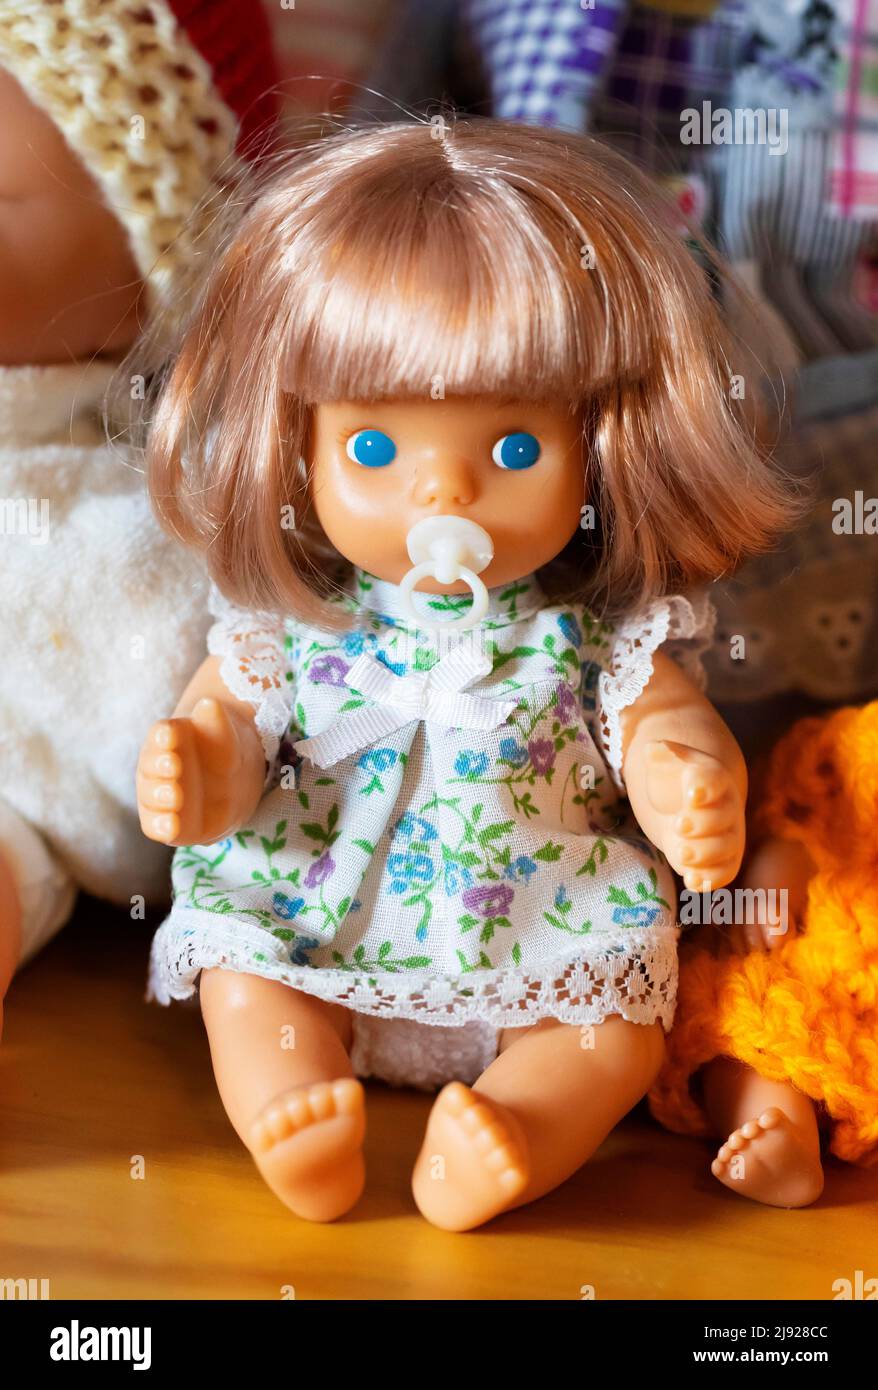 Portrait of an old decorative baby doll, children's toy, symbolic image, Austria Stock Photo